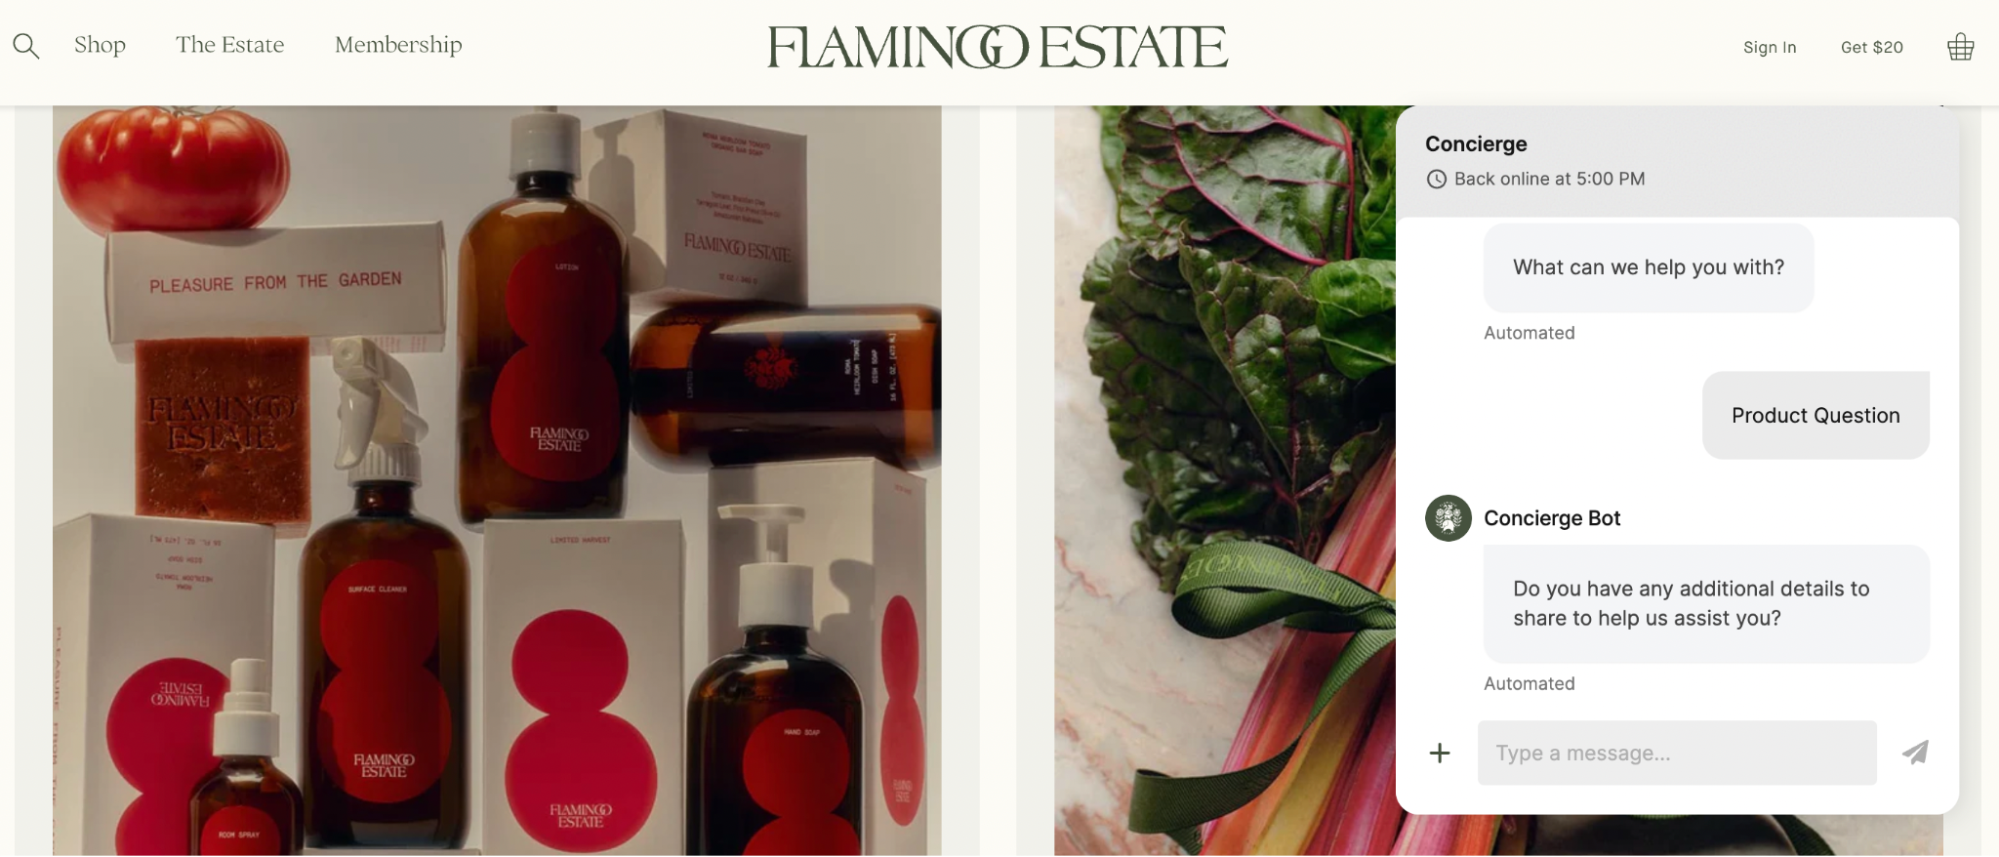 Flamingo Estate’s pop-up chatbot asks “What can we help with?” and encourages shoppers to share additional details.